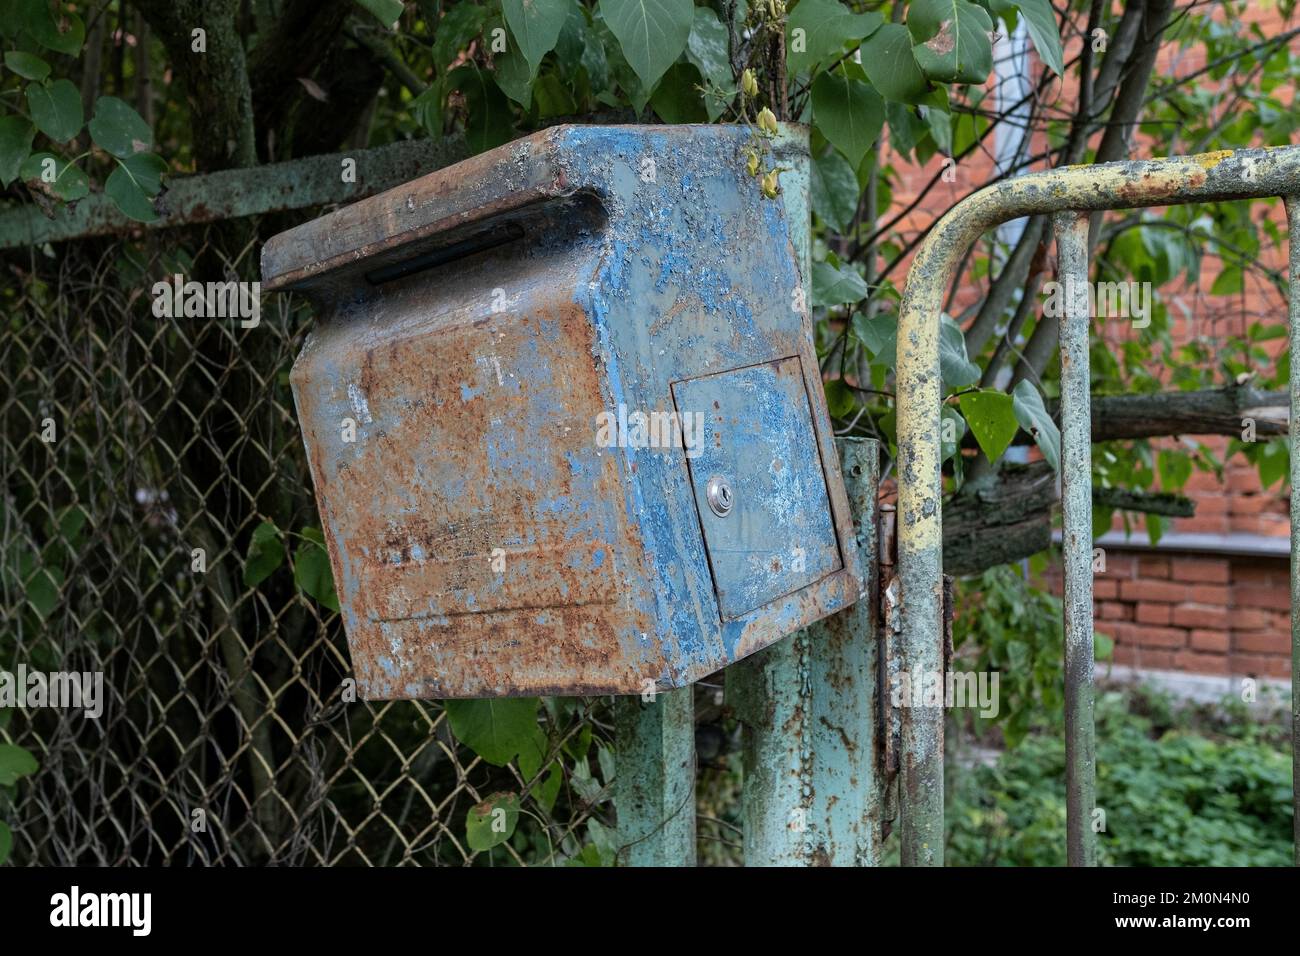 Mailbox is hanging on the fence. Old, rusty mailbox with peeling paint. Stock Photo